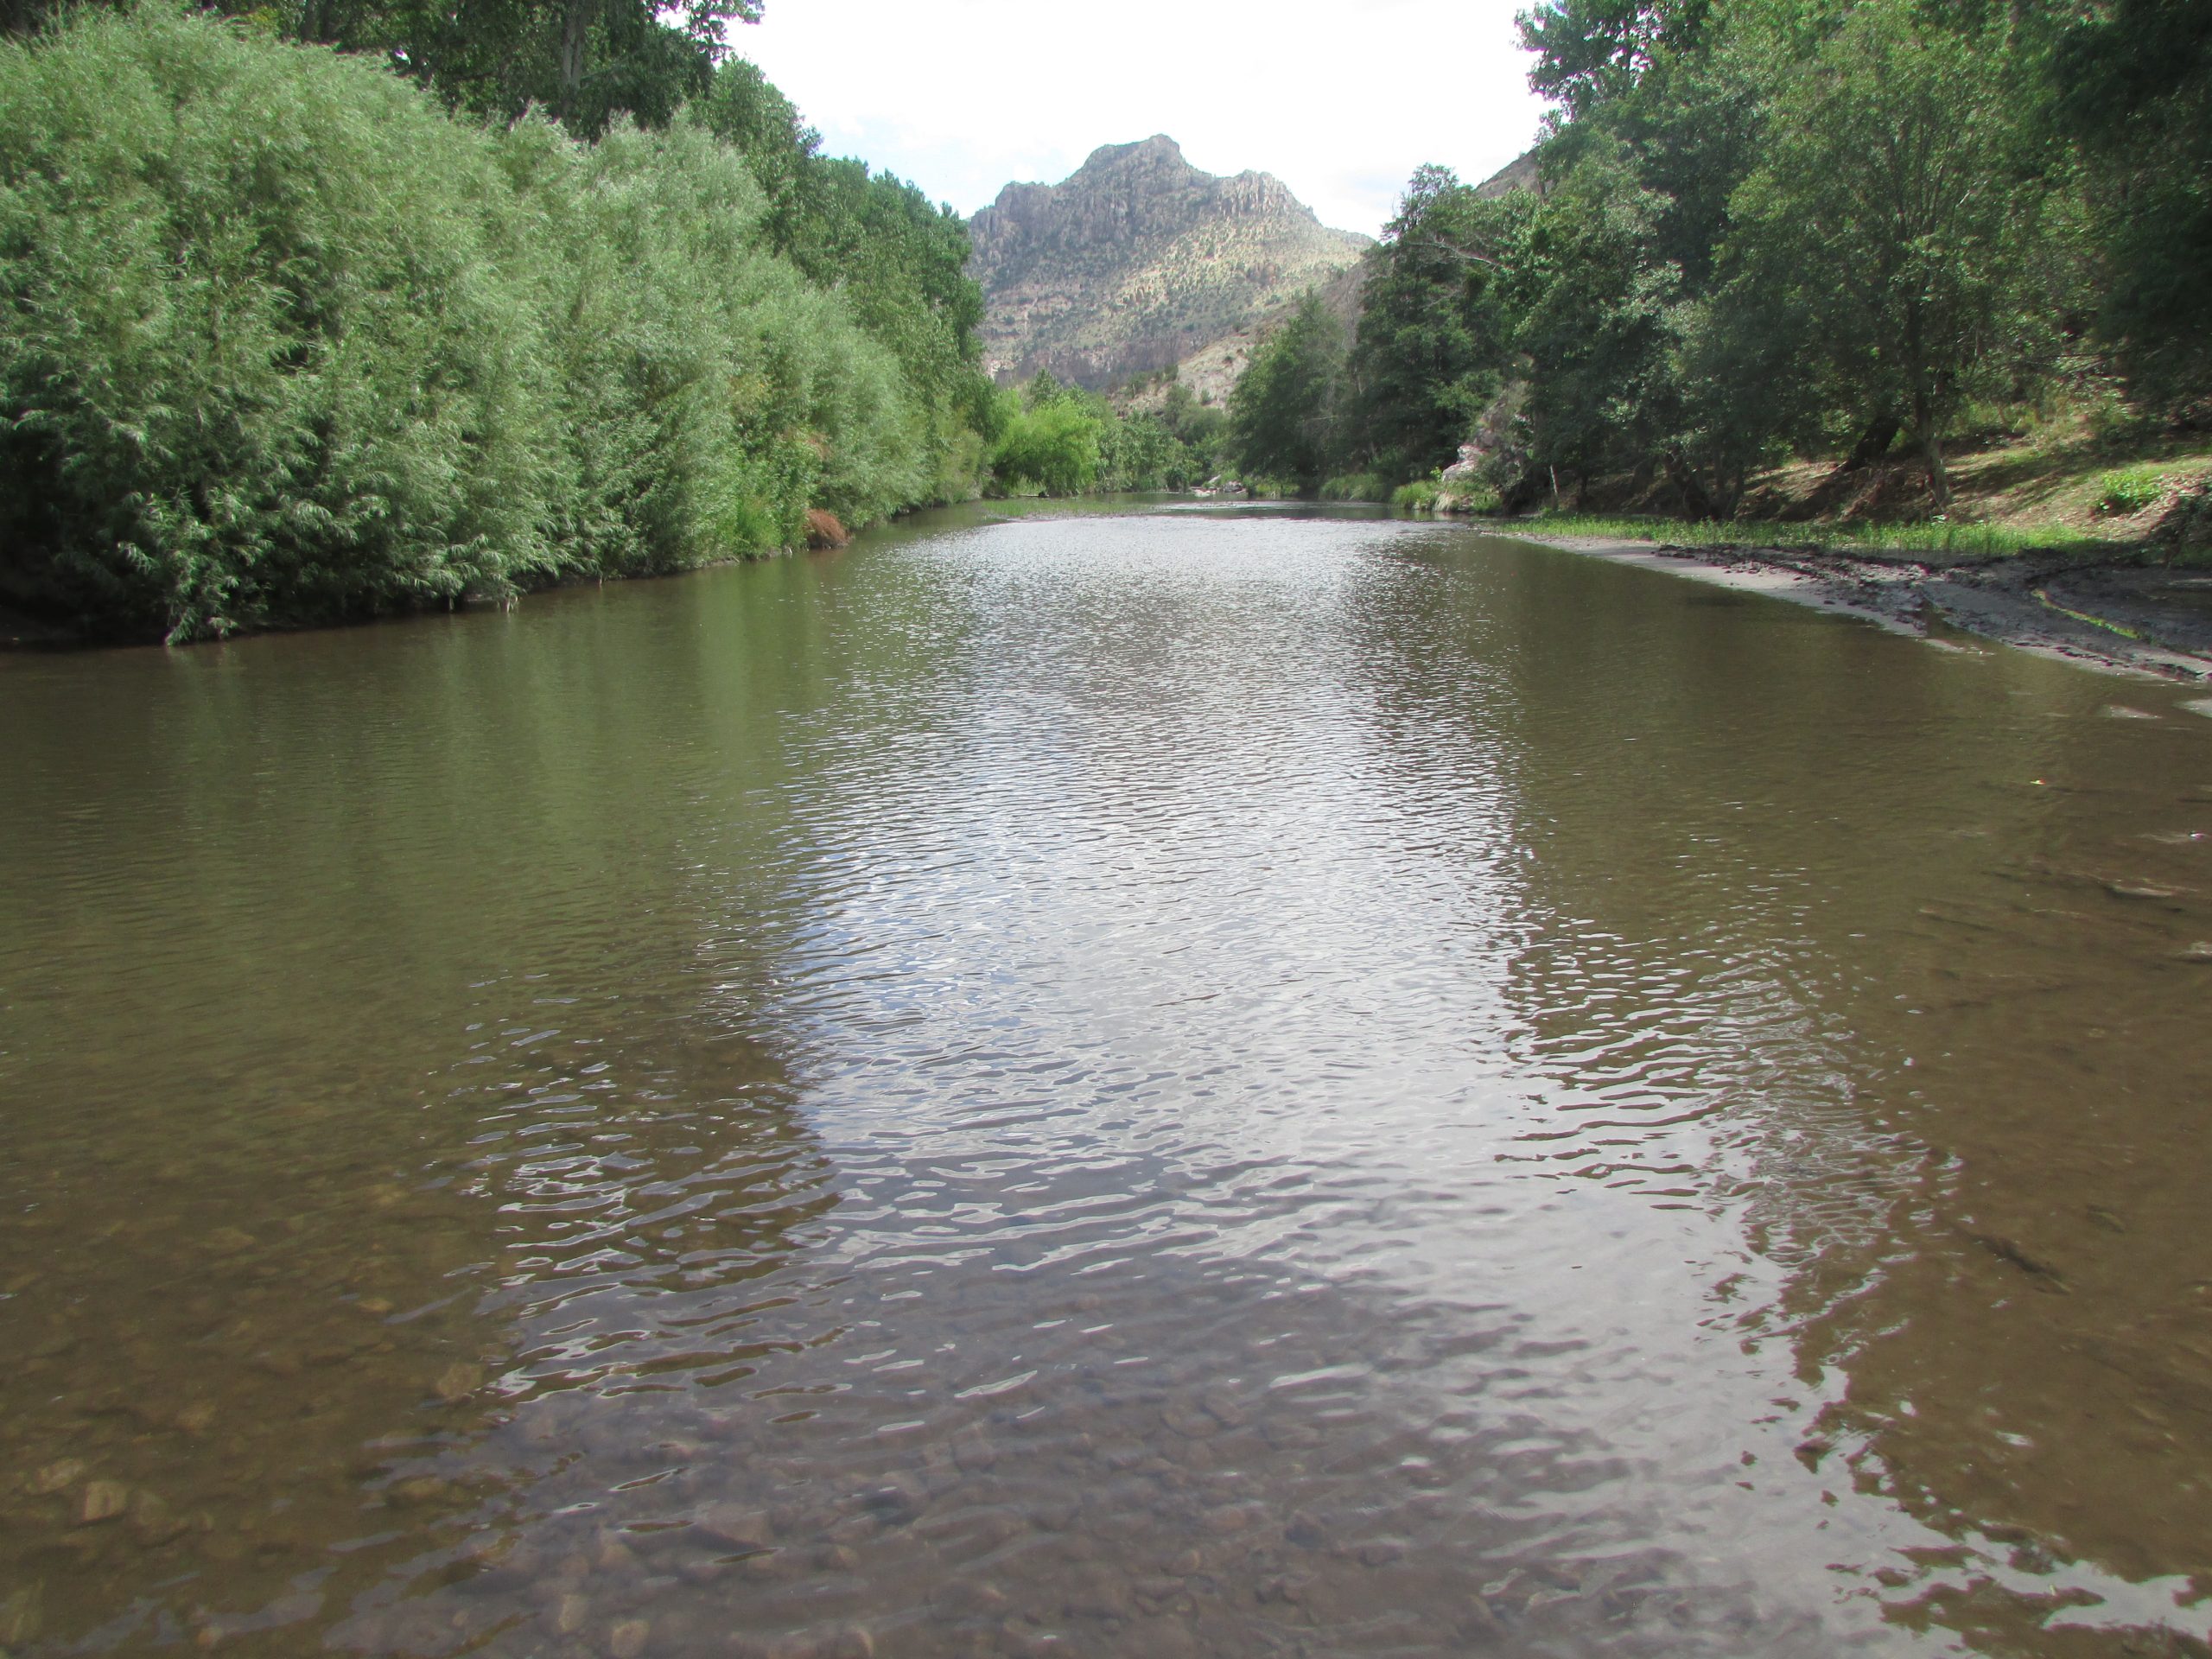 More water or more wild: The decades-long struggle over the Gila River’s fate